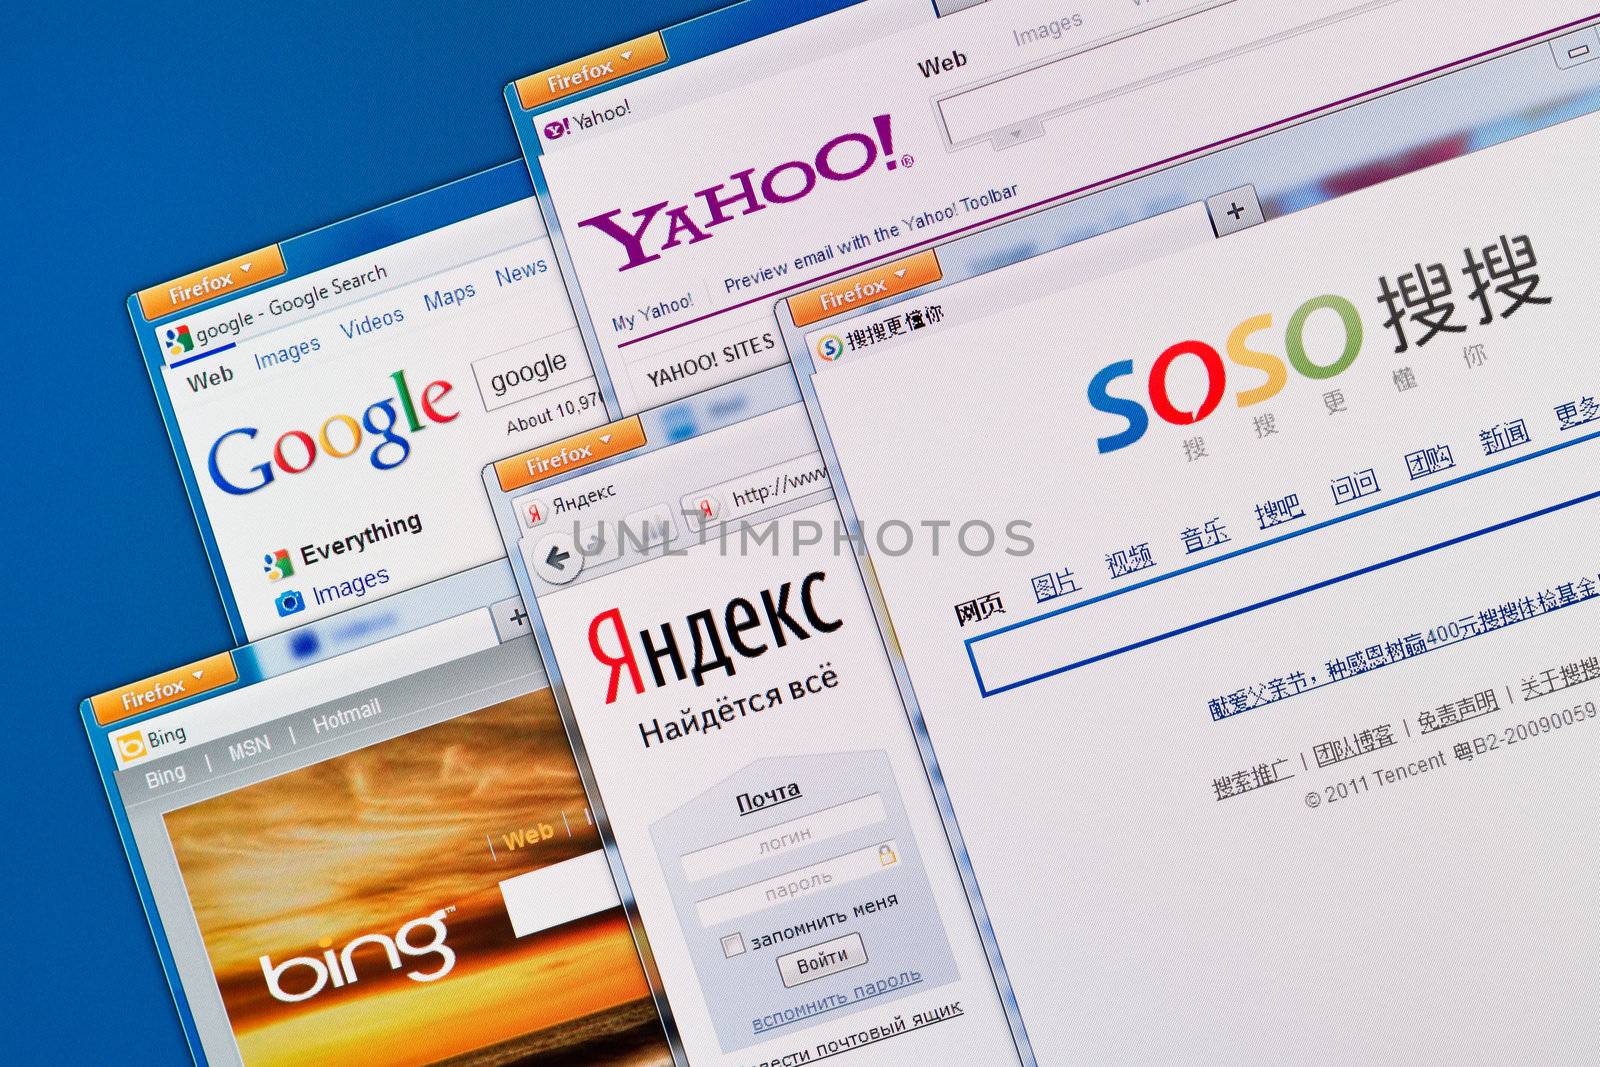 Kiev, Ukraine - June 13, 2011 - Search engine web sites on a computer screen, including Google, Yahoo, Bing, Yandex and Soso. These search engine web sites the most visited and popular in the world.